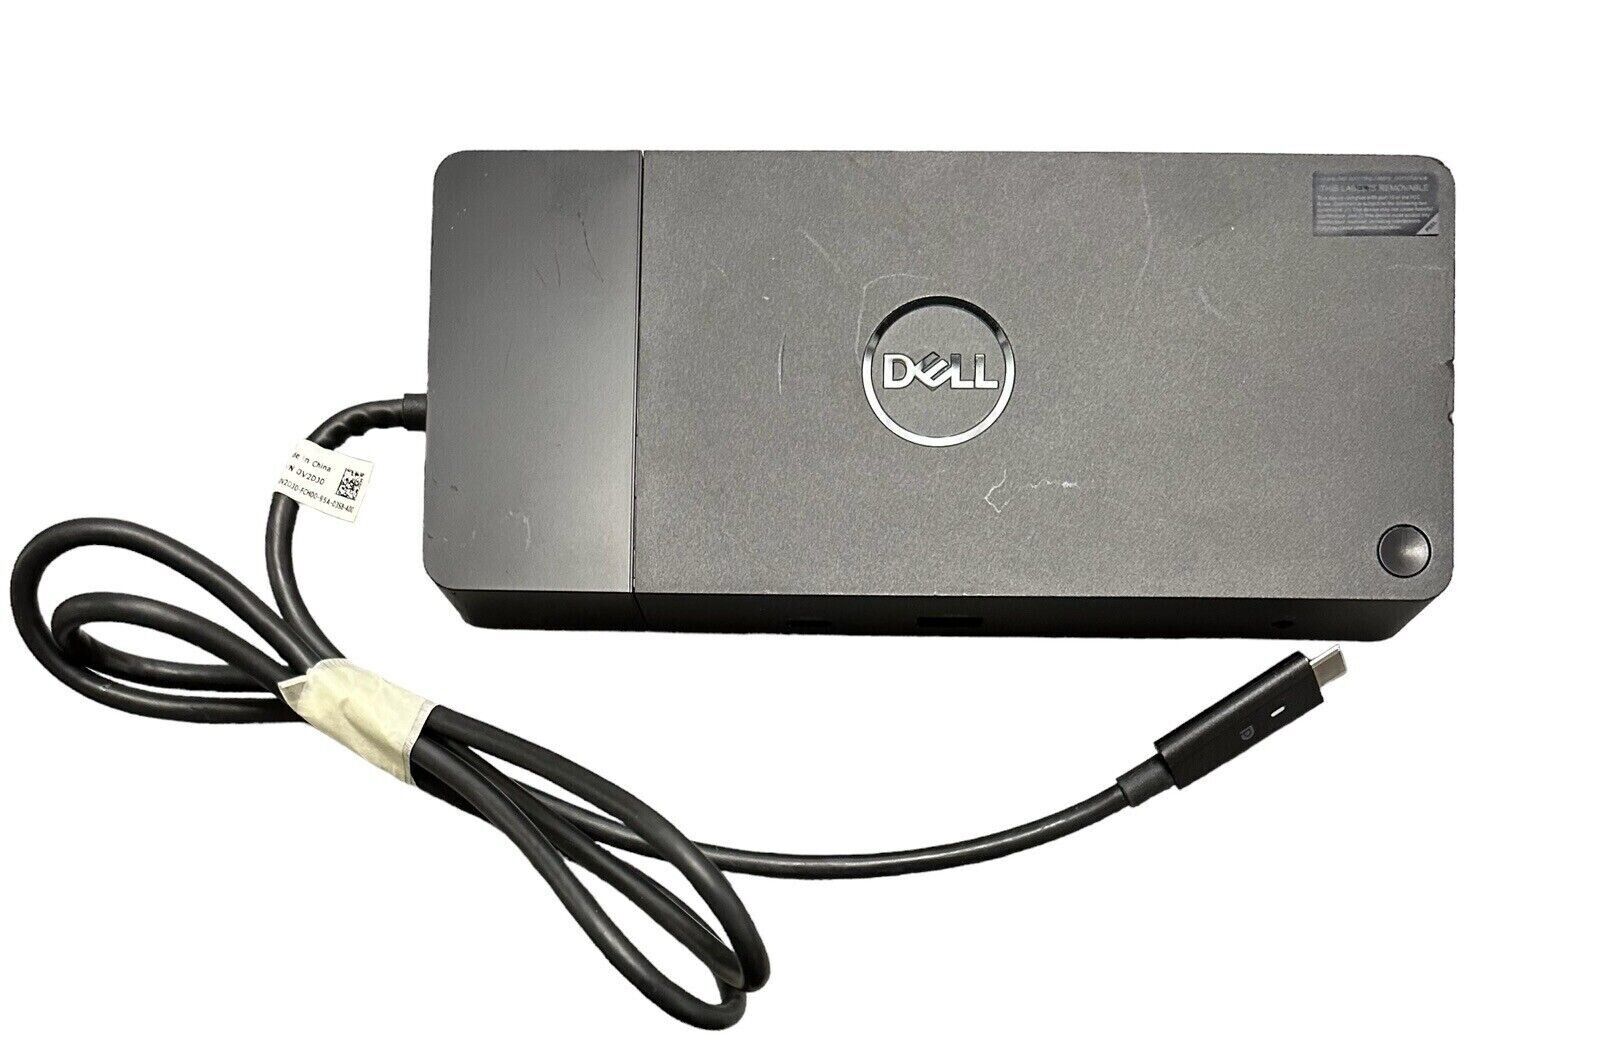 Dell K20A Thunderbolt Docking Station - Black K20A001 WITH AC ADAPTER